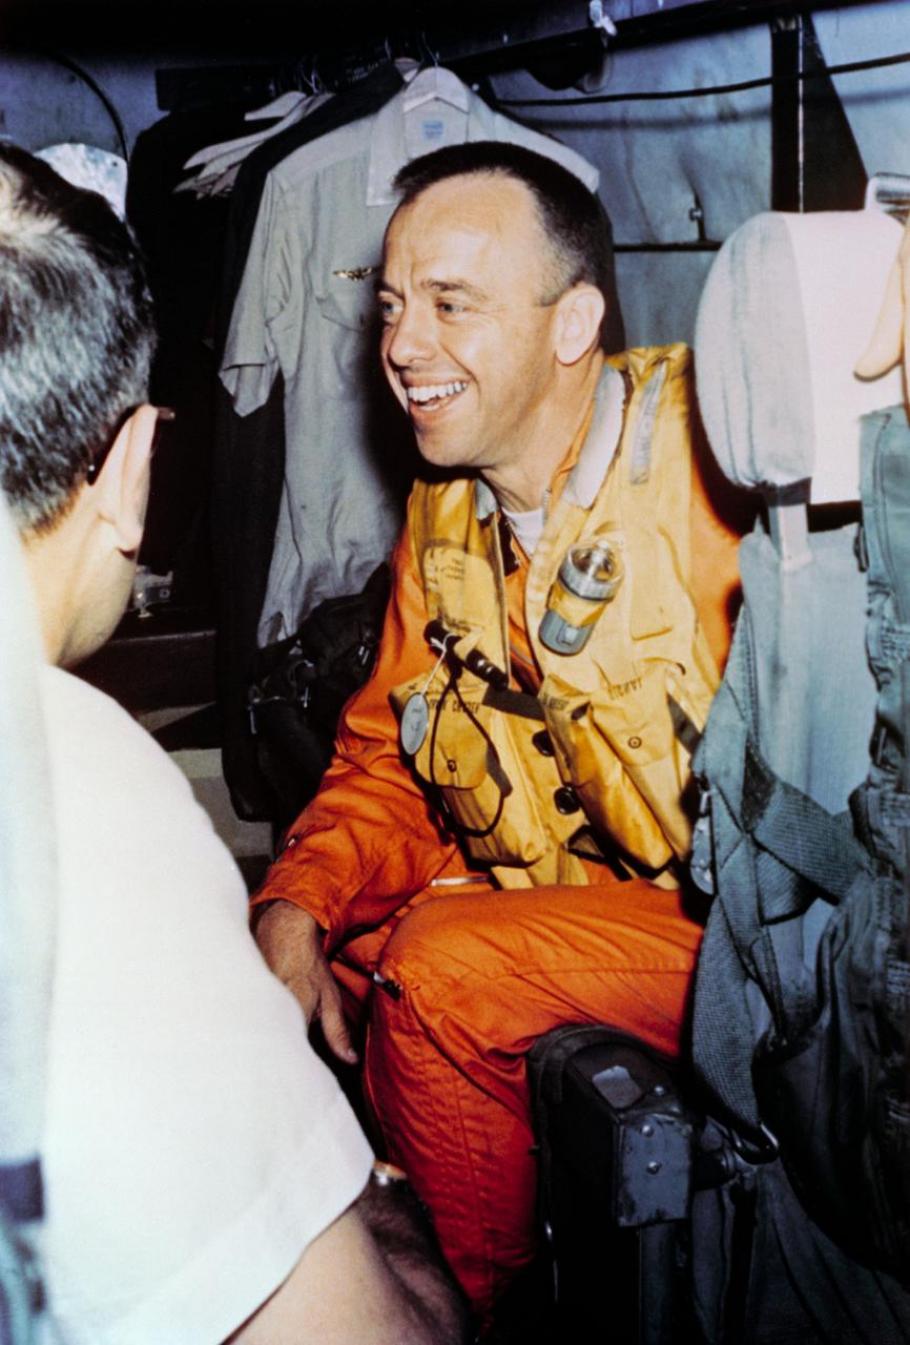 Alan Shepard onboard a helicopter as he is transported from the aircraft carrier following Freedom 7 splashdown